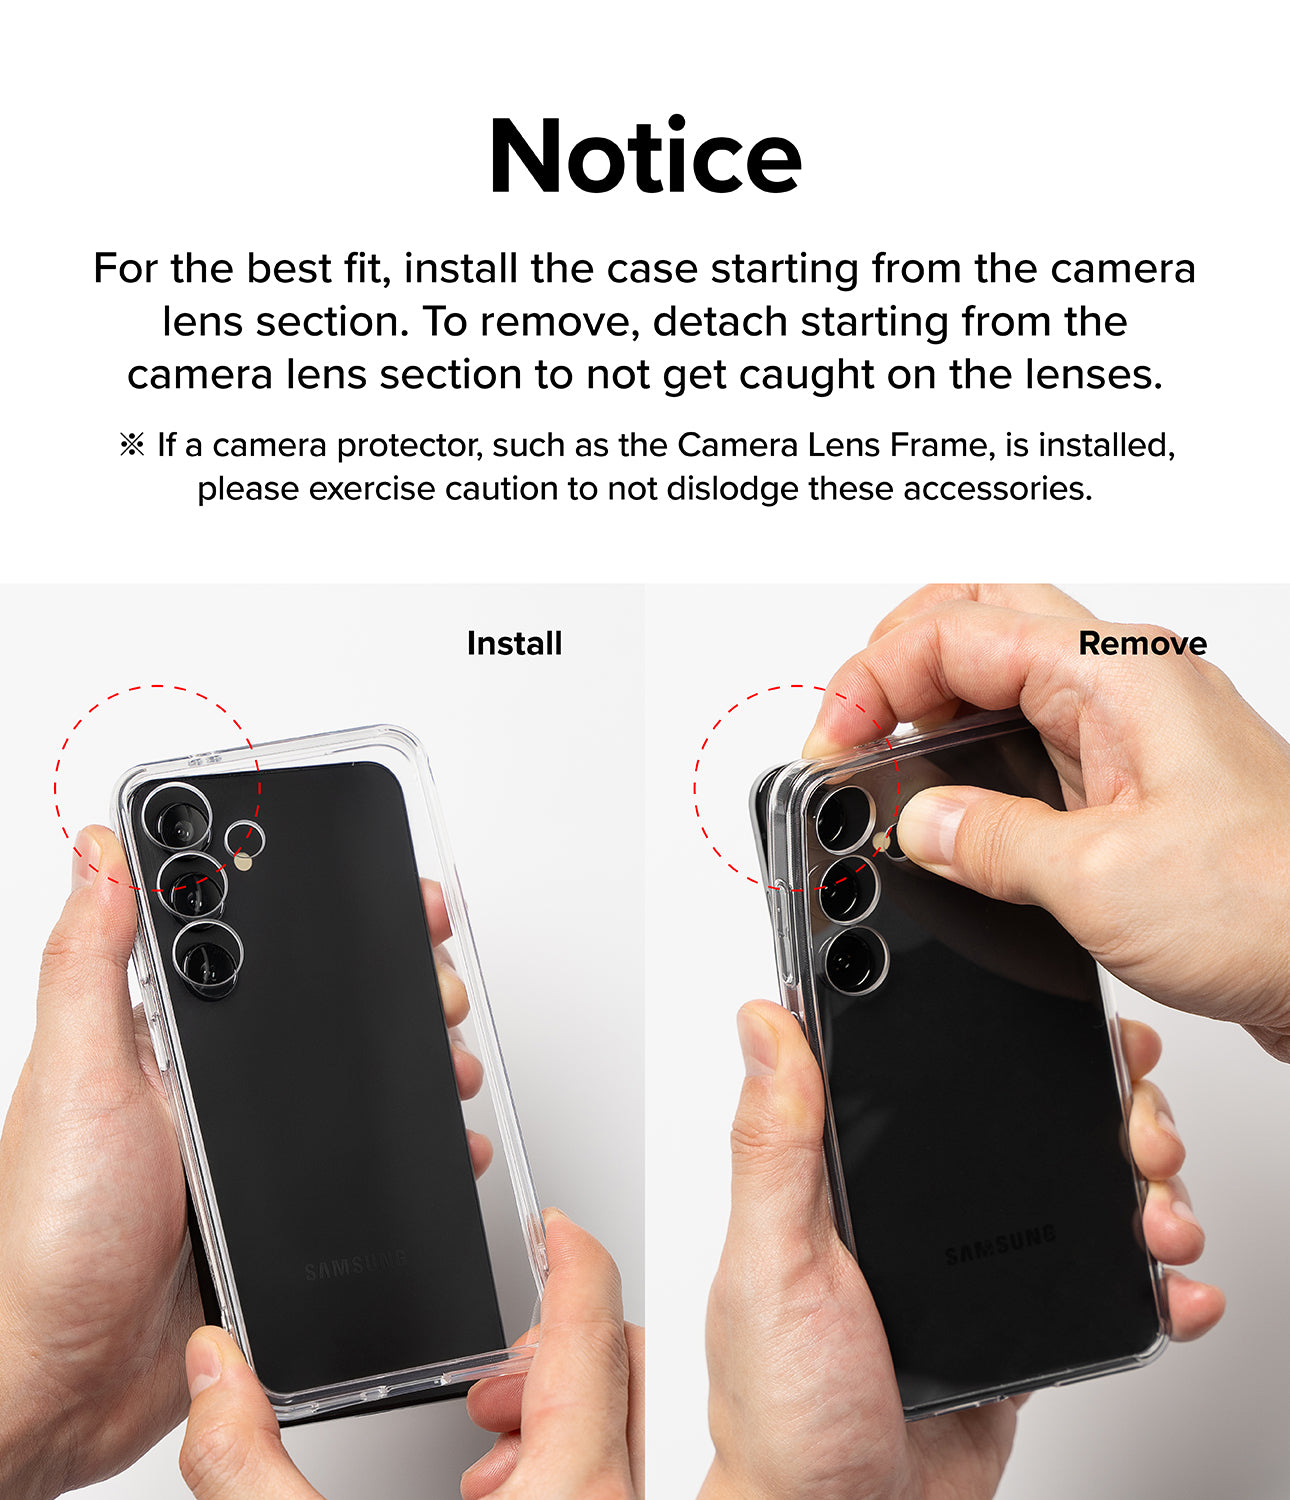 Galaxy S24 Ultra Case | Fusion Bold - Notice. For the best fit, install the case starting from the camera lens section. To remove, detach starting from the camera lens section to not get caught on the lenses.